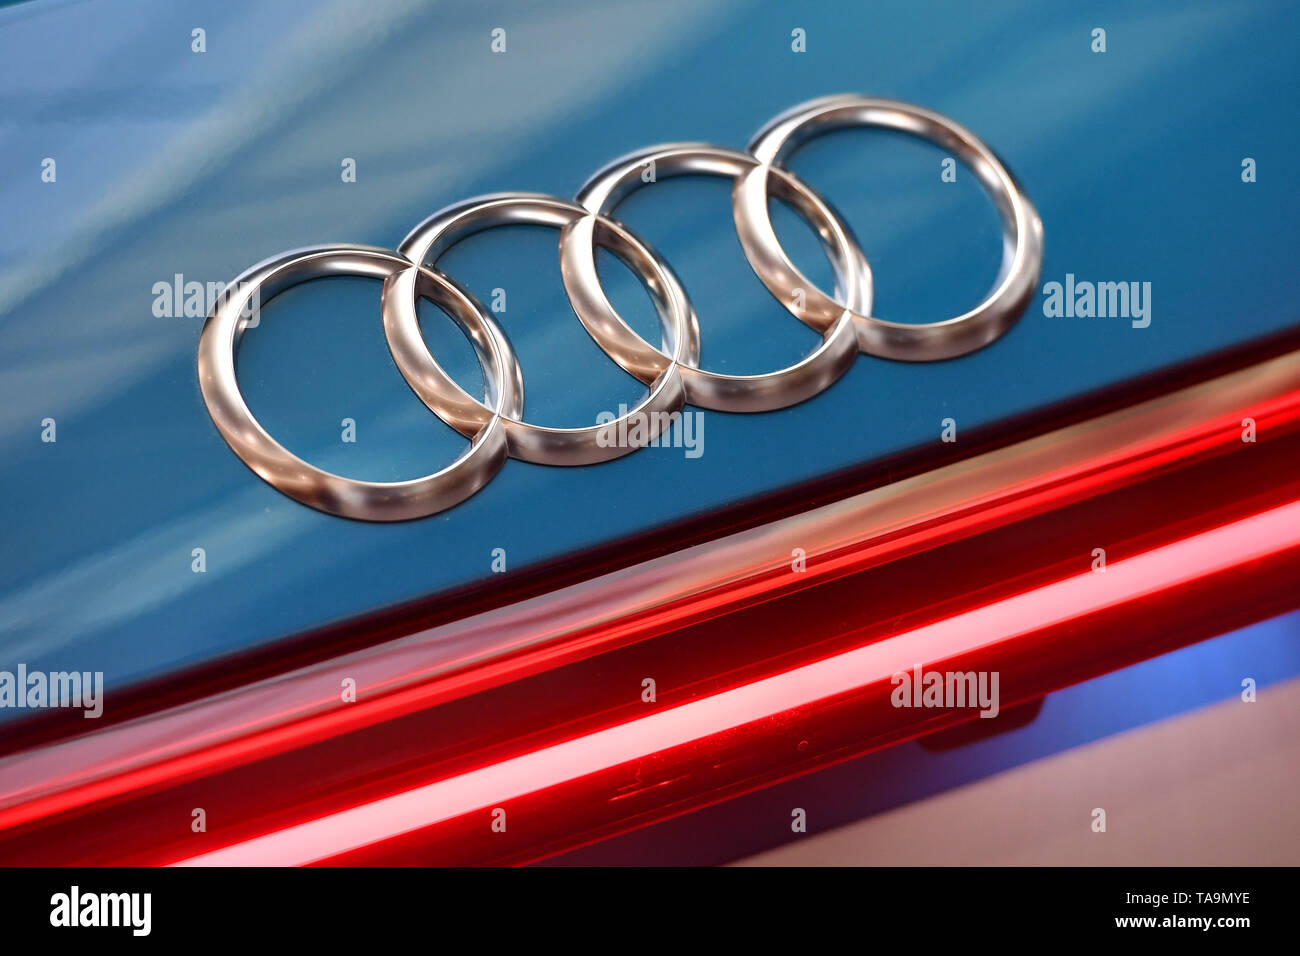 Neckarsulm, Deutschland. 23rd May, 2019. Edge motif, feature, general- Audi  rings, brand emblem, logo on the rear of an E-TRON.E car, electric car.  130th Annual General Meeting 2019 AUDI AG on 23.05.2019